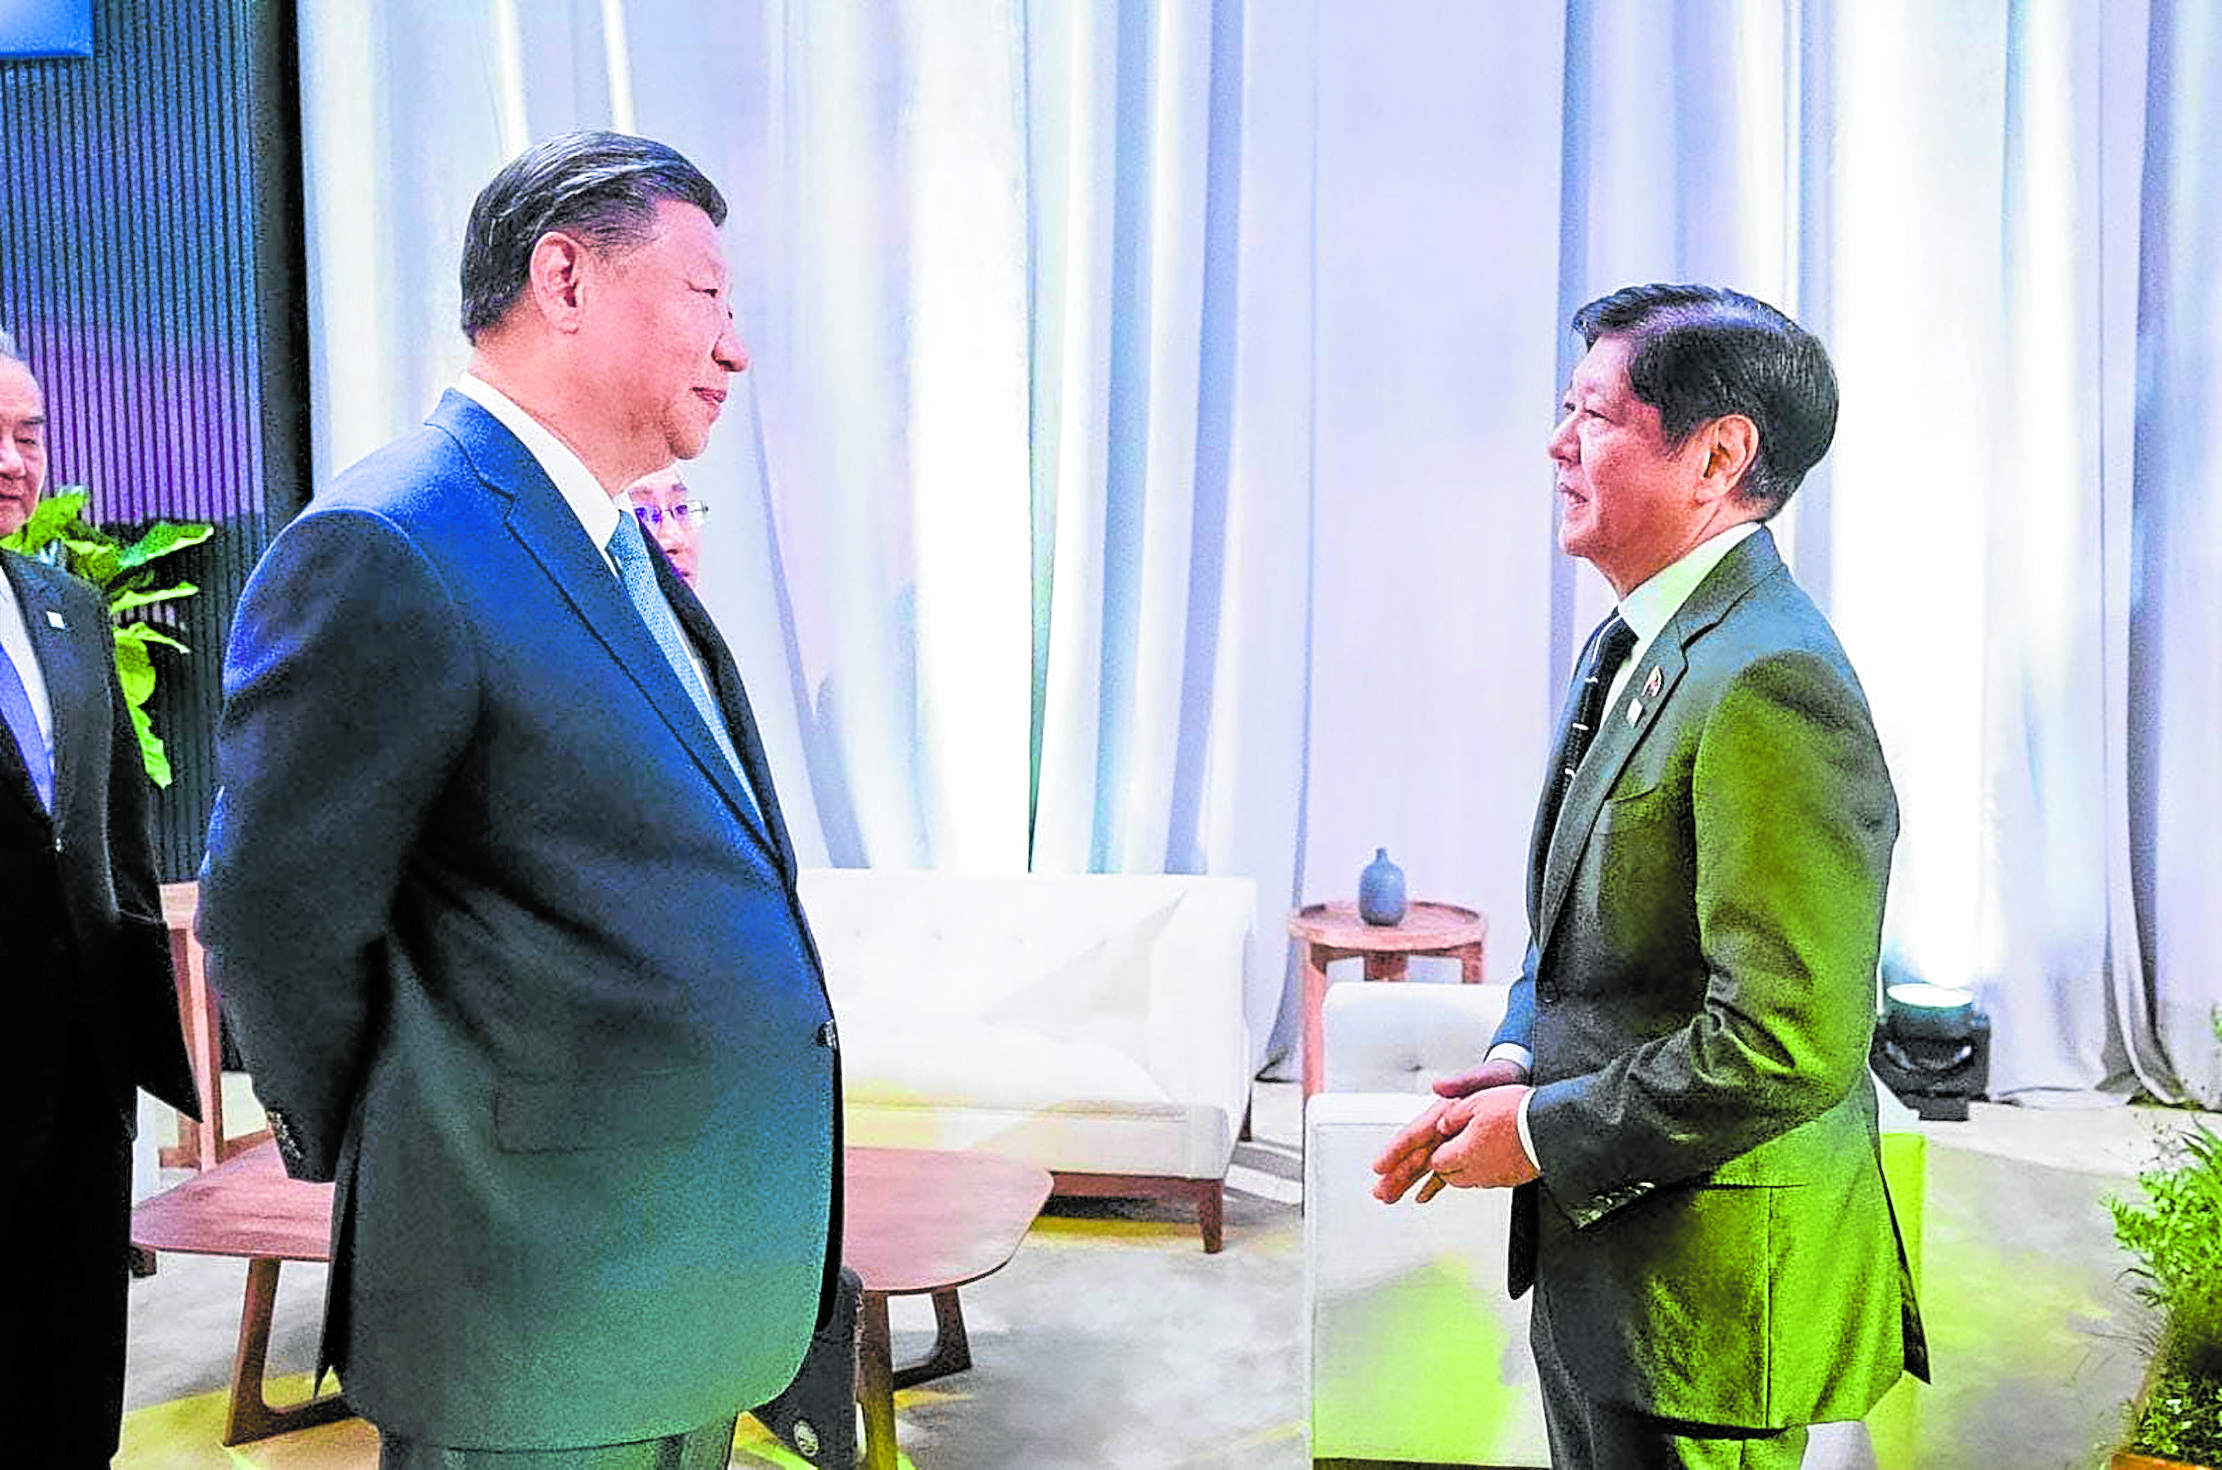 President Marcos, seenhere with Chinese President Xi Jinping